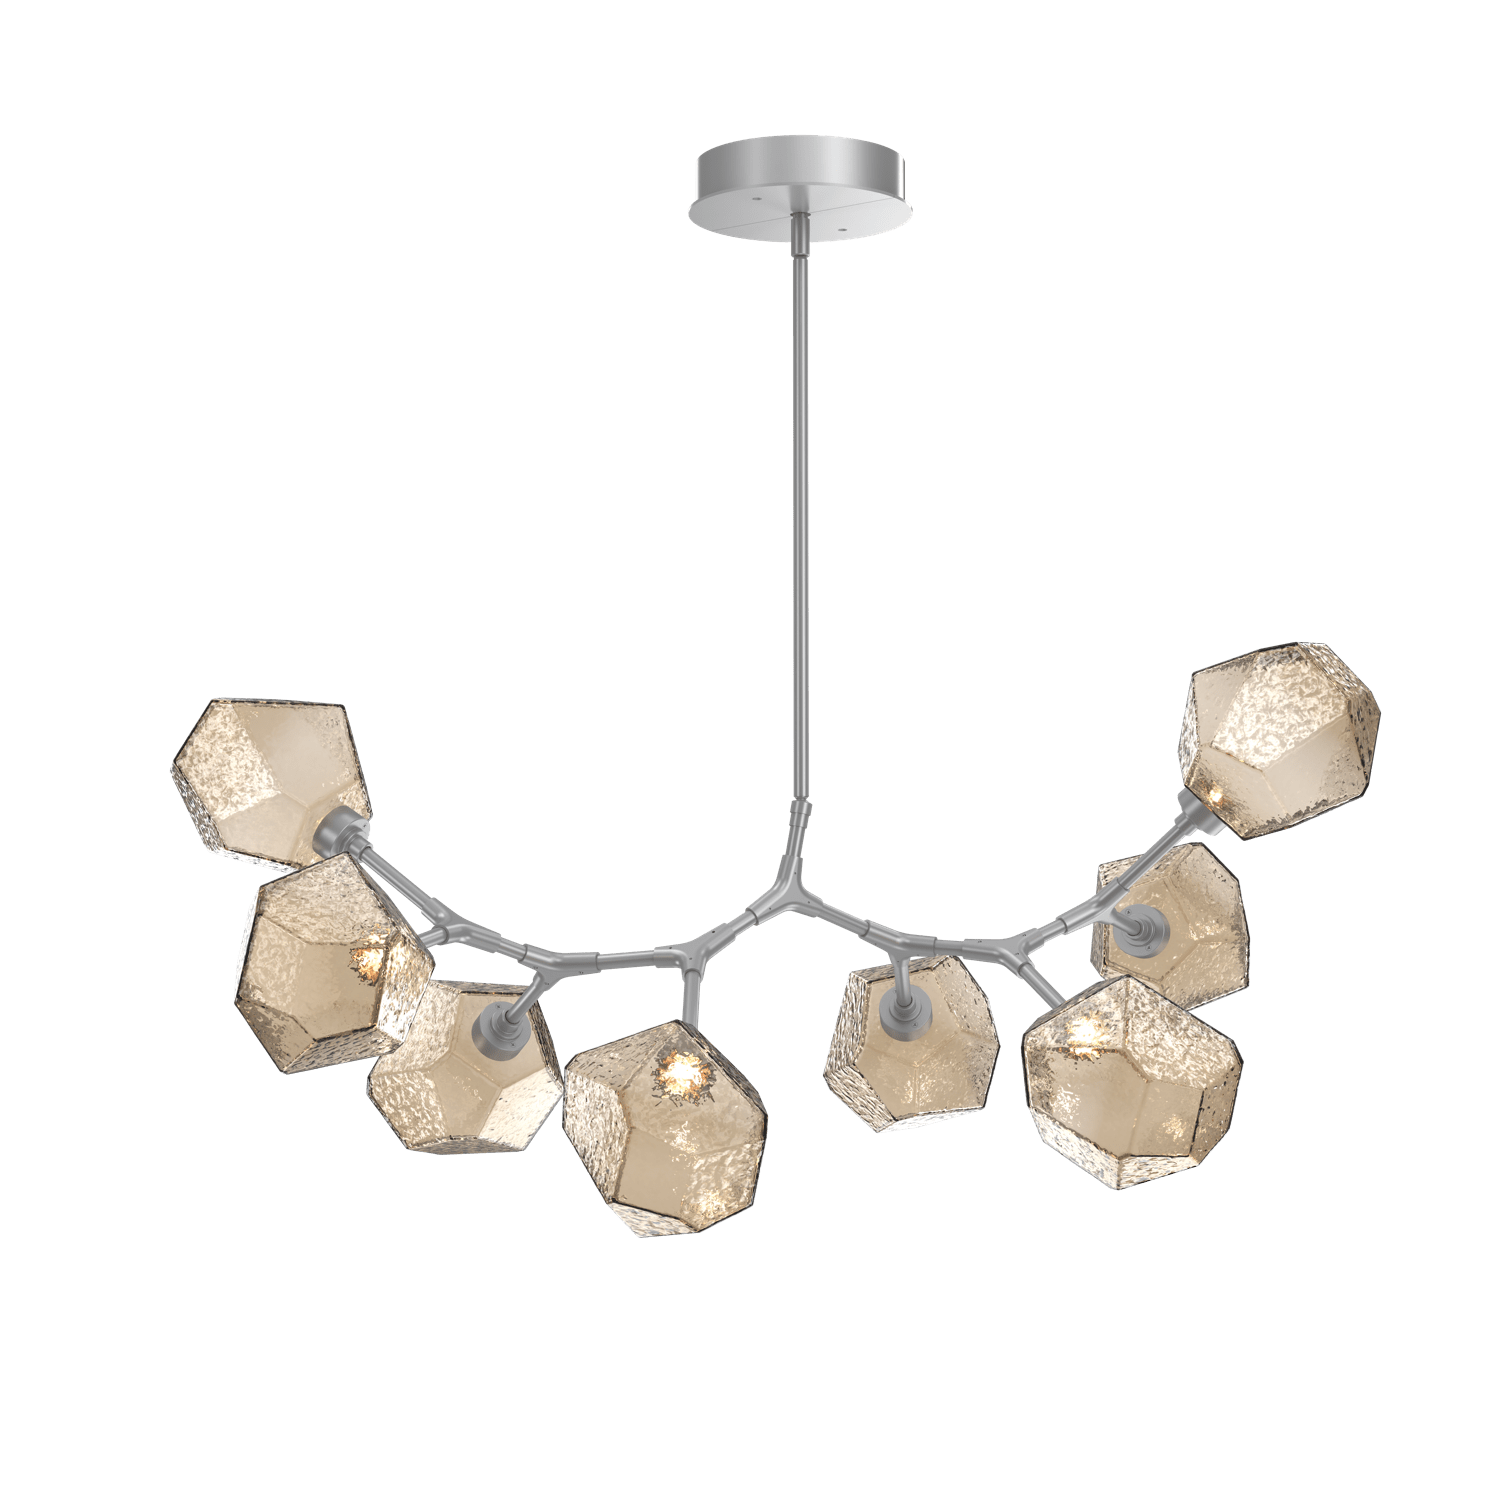 PLB0039-BB-CS-B-Hammerton-Studio-Gem-8-light-modern-branch-chandelier-with-classic-silver-finish-and-bronze-blown-glass-shades-and-LED-lamping